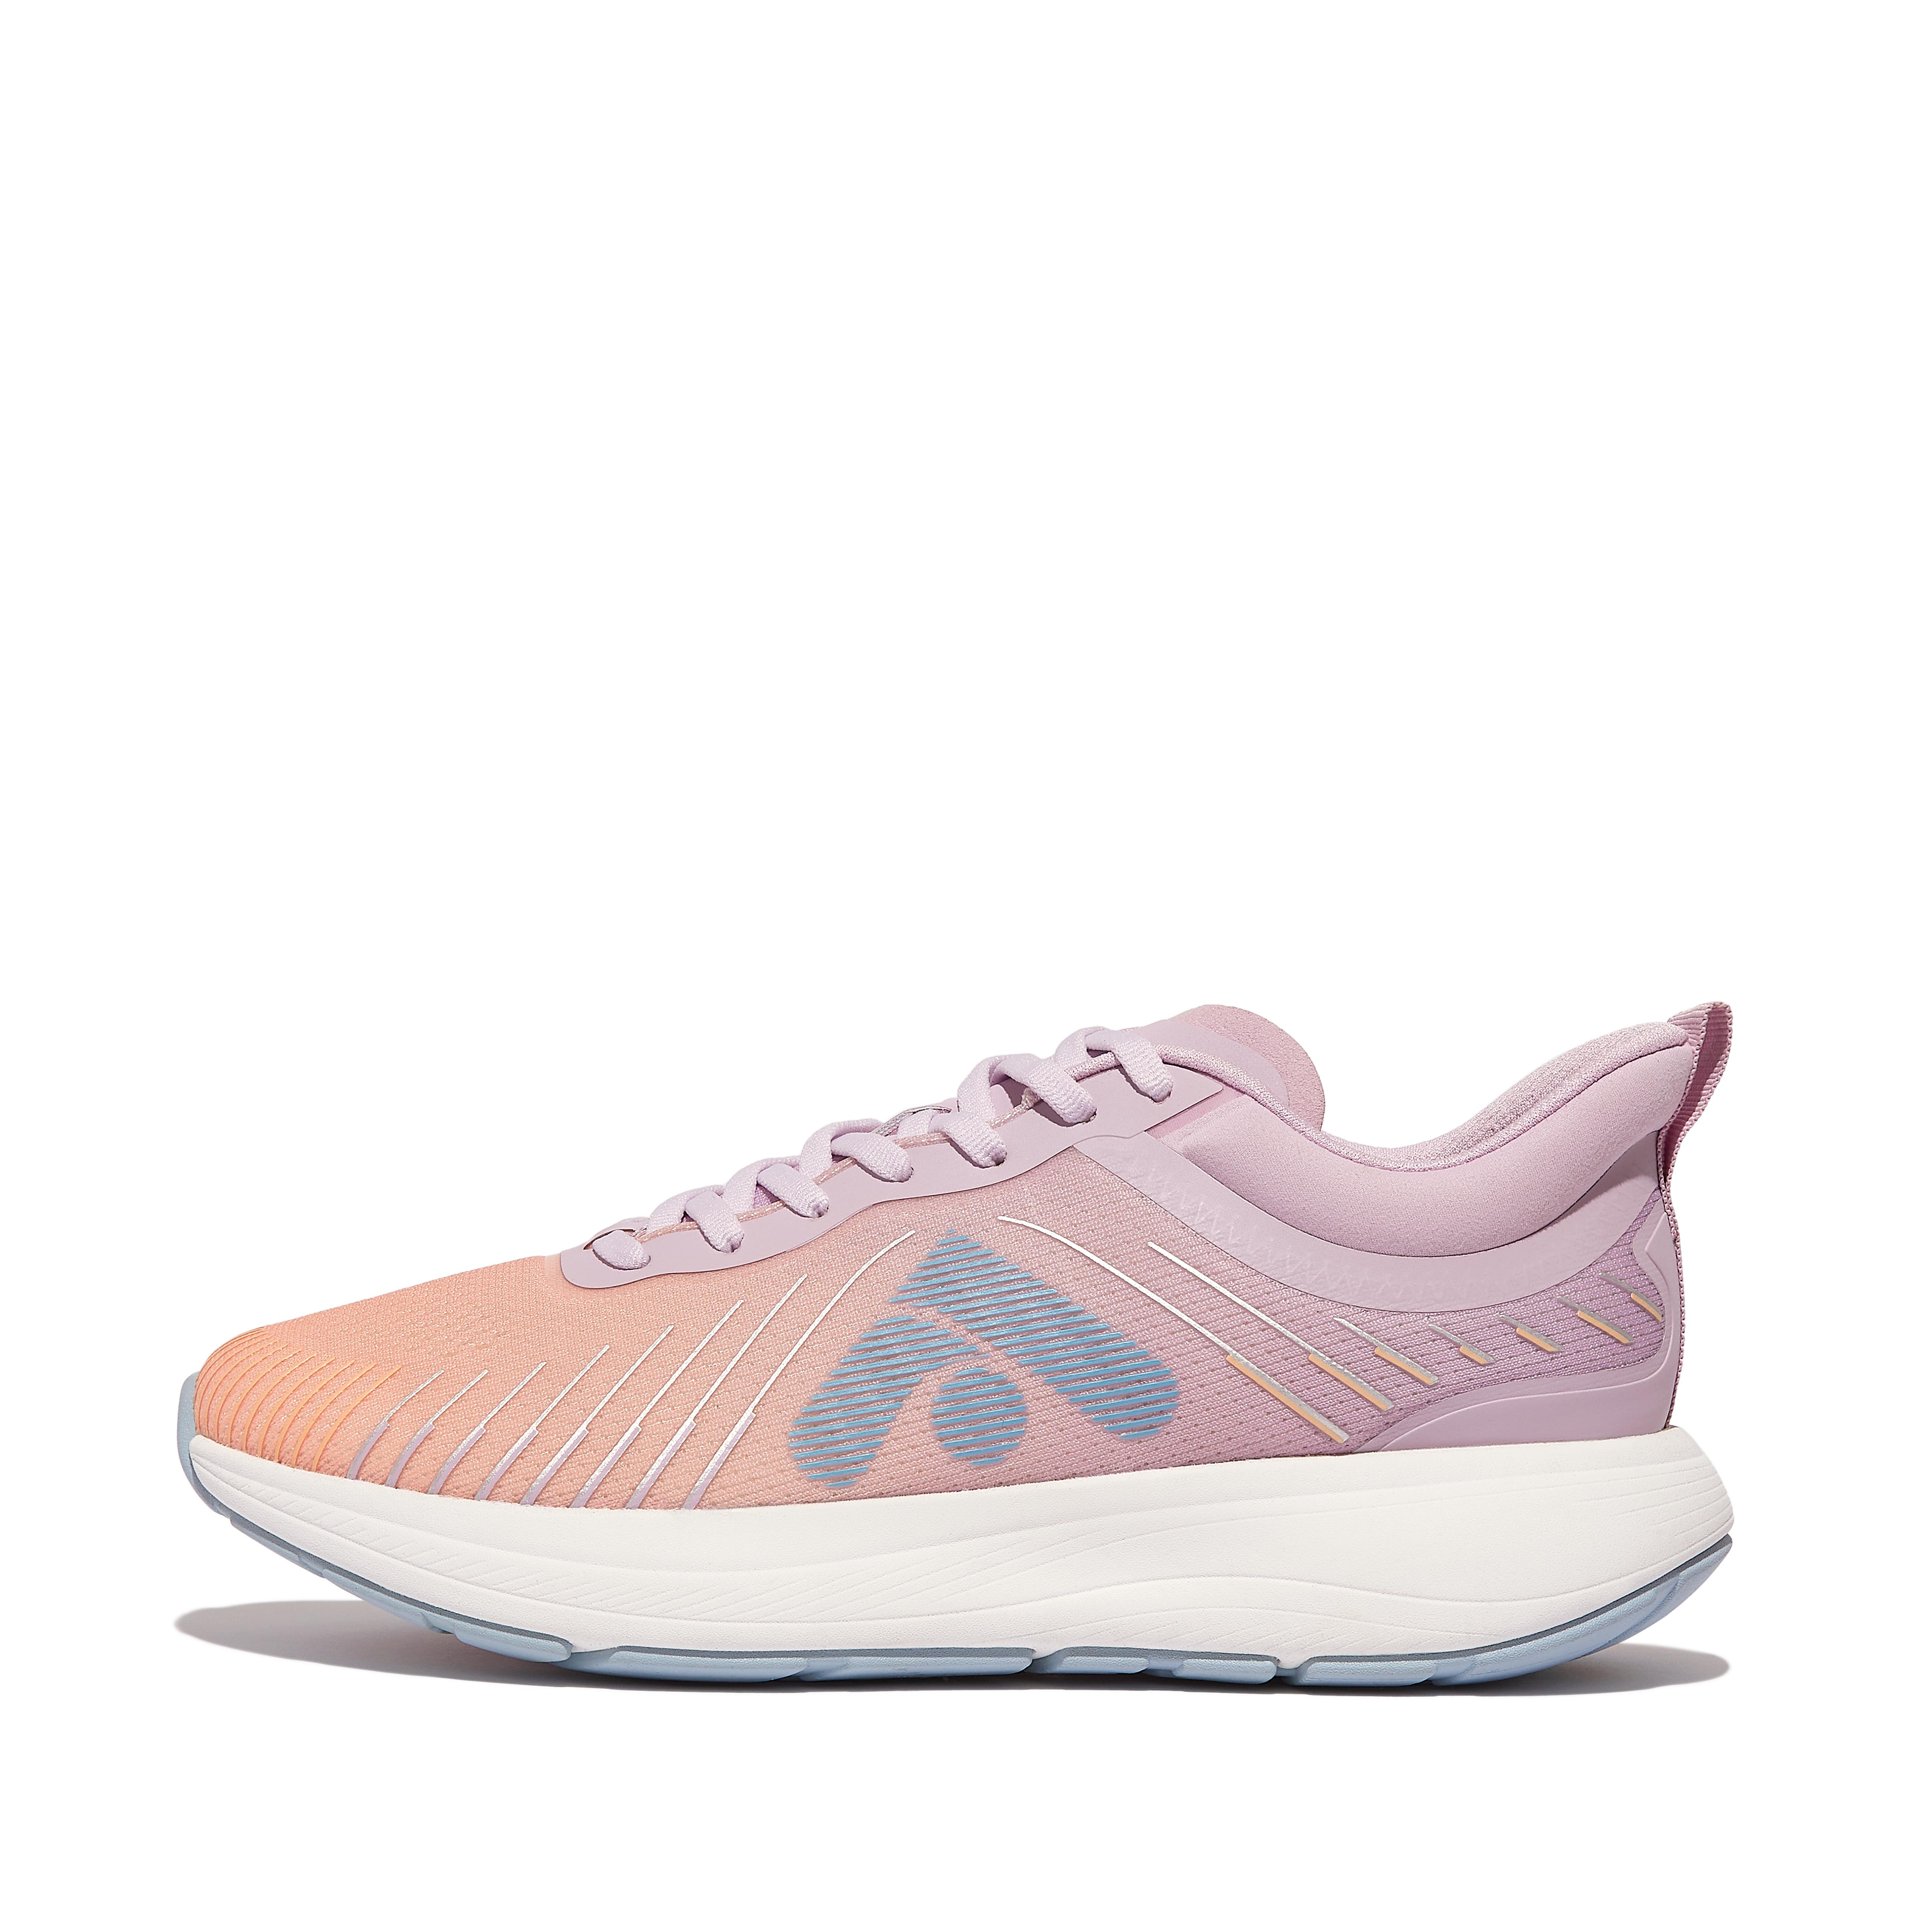 Fitflop Ombre-Edition Mesh Running/Sports Sneakers,wild-lilac-blushy/skywash-blue